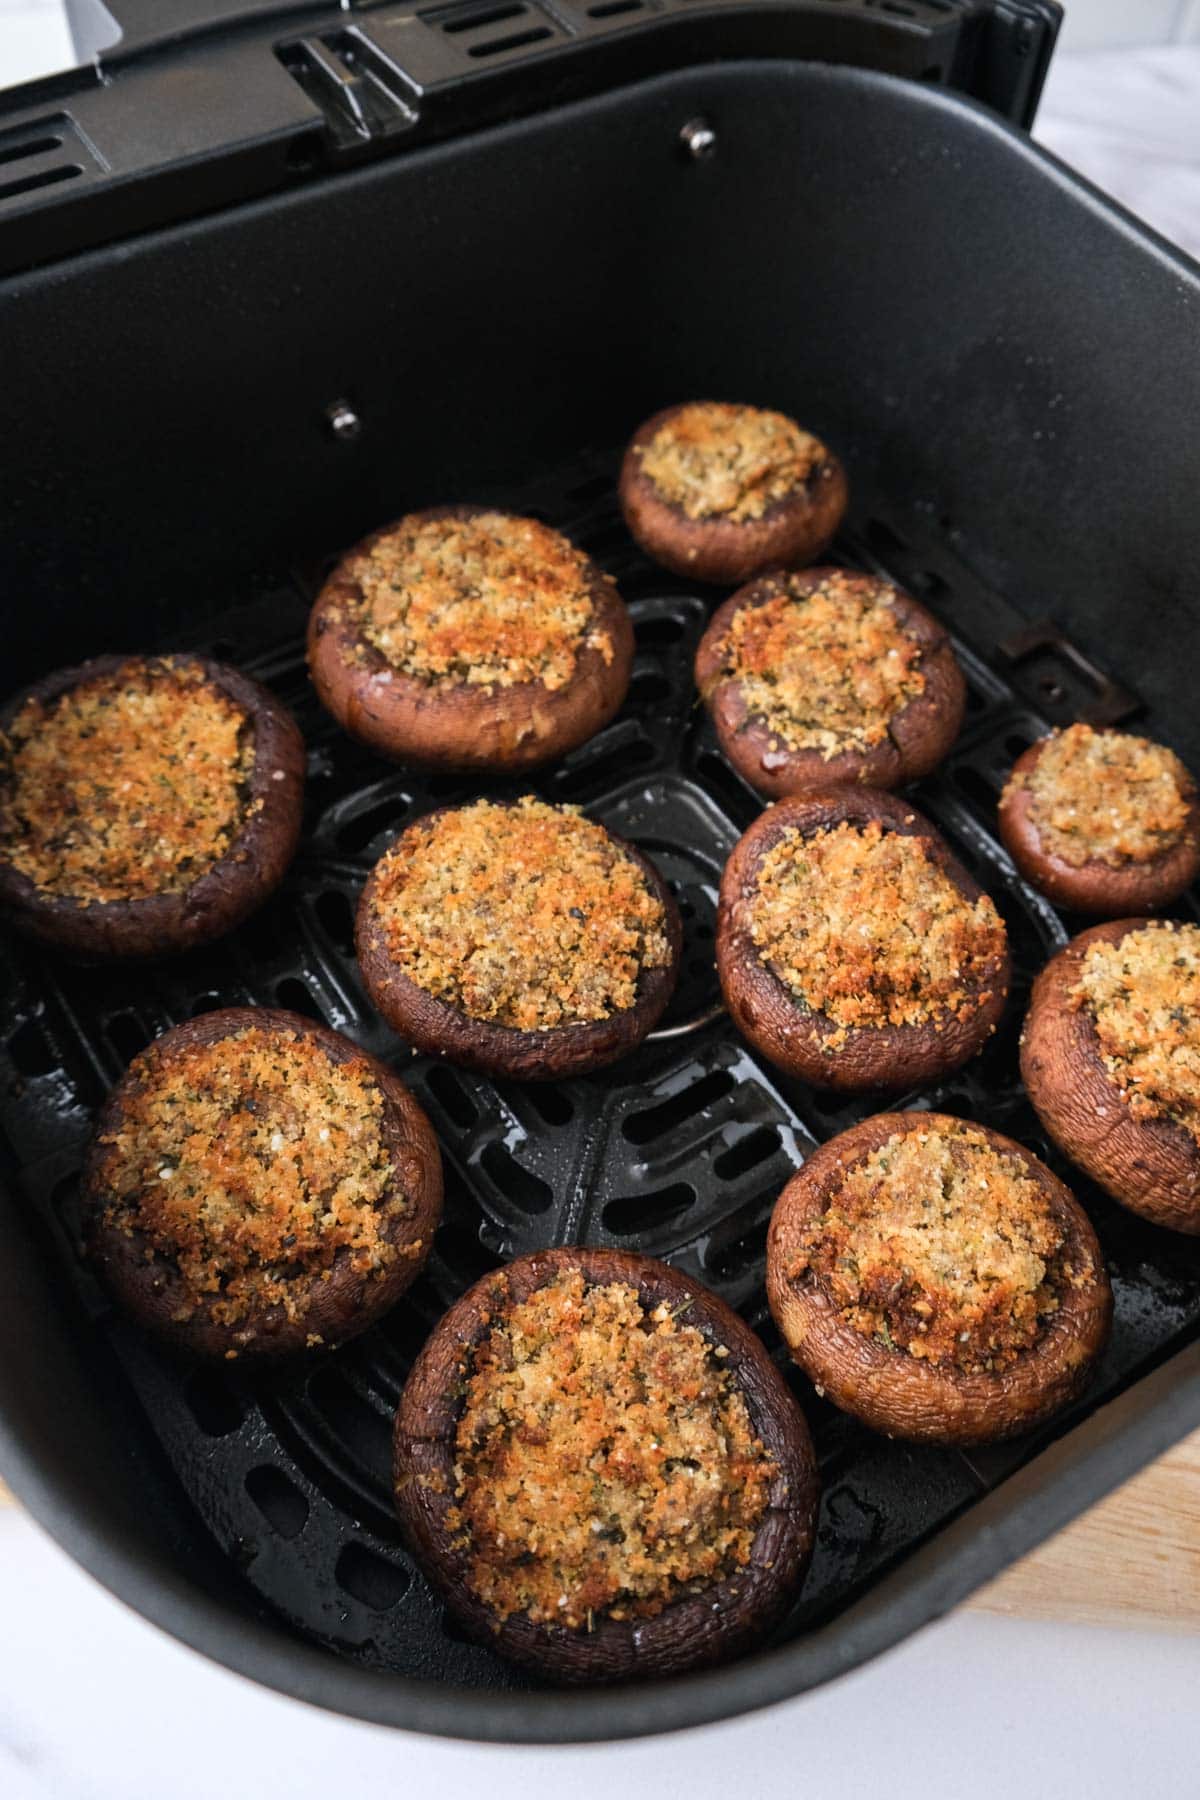 roasted stuffed mushroom caps in black air fryer tray with counter underneath.